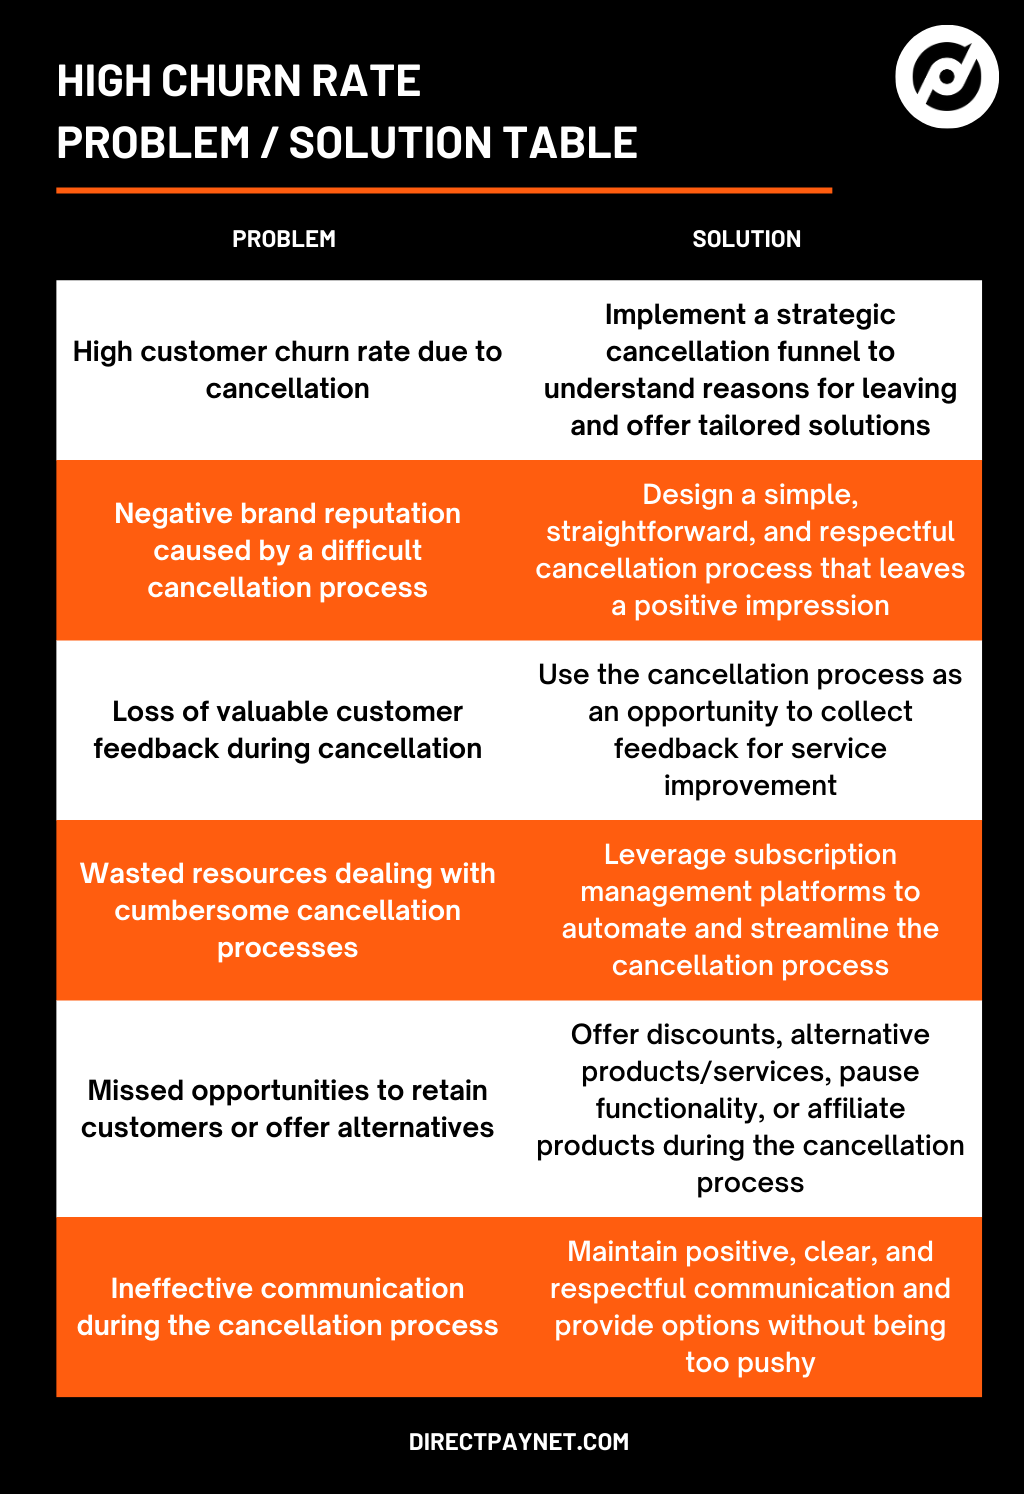 Problem and solution comparison for customer churn.